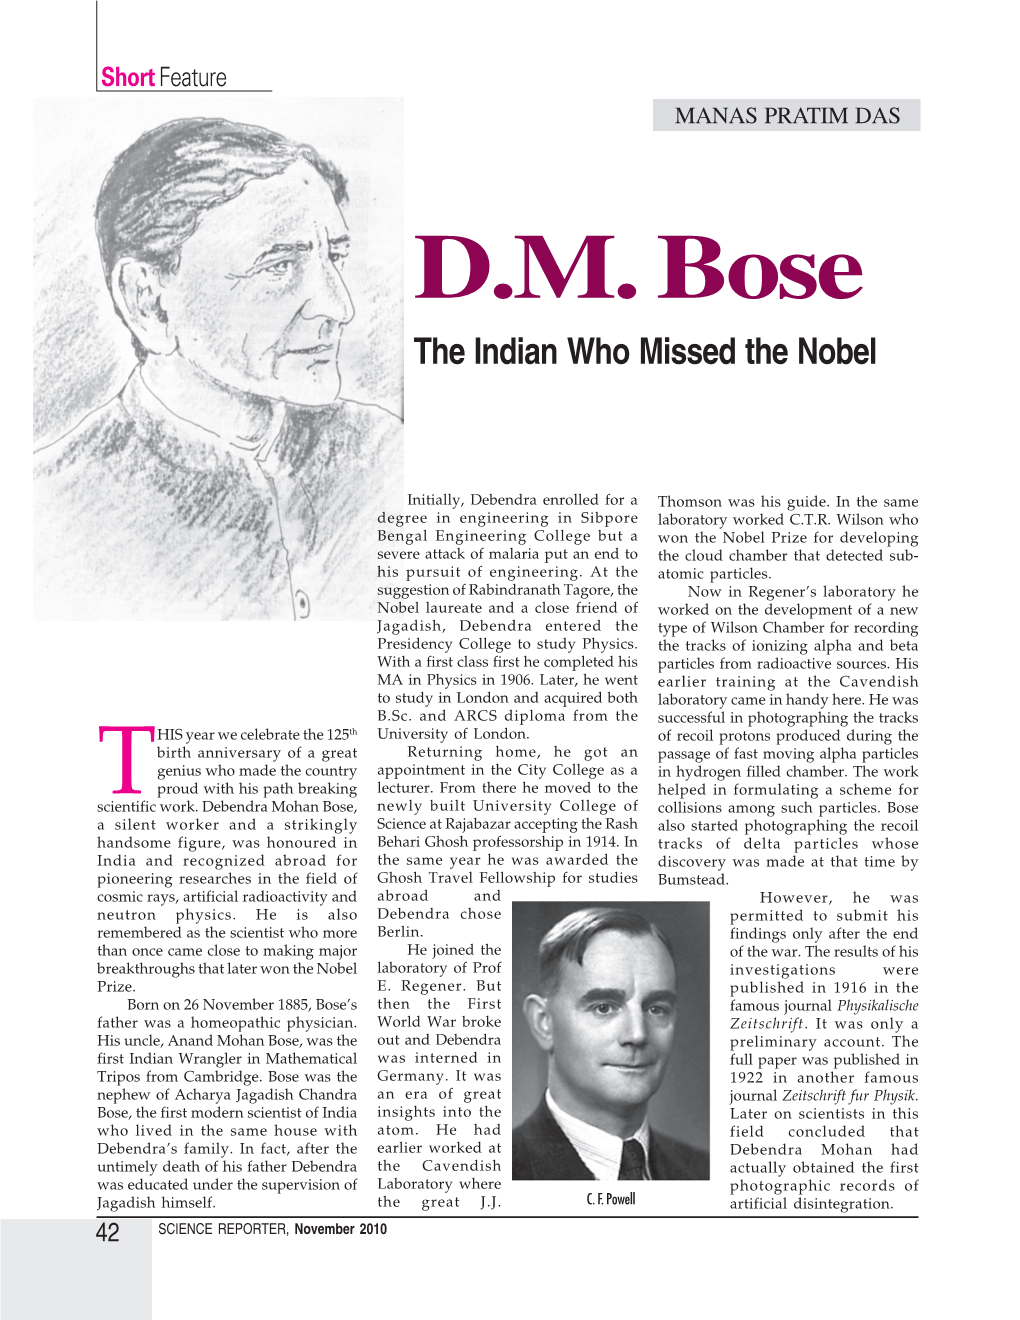 D.M. Bose the Indian Who Missed the Nobel